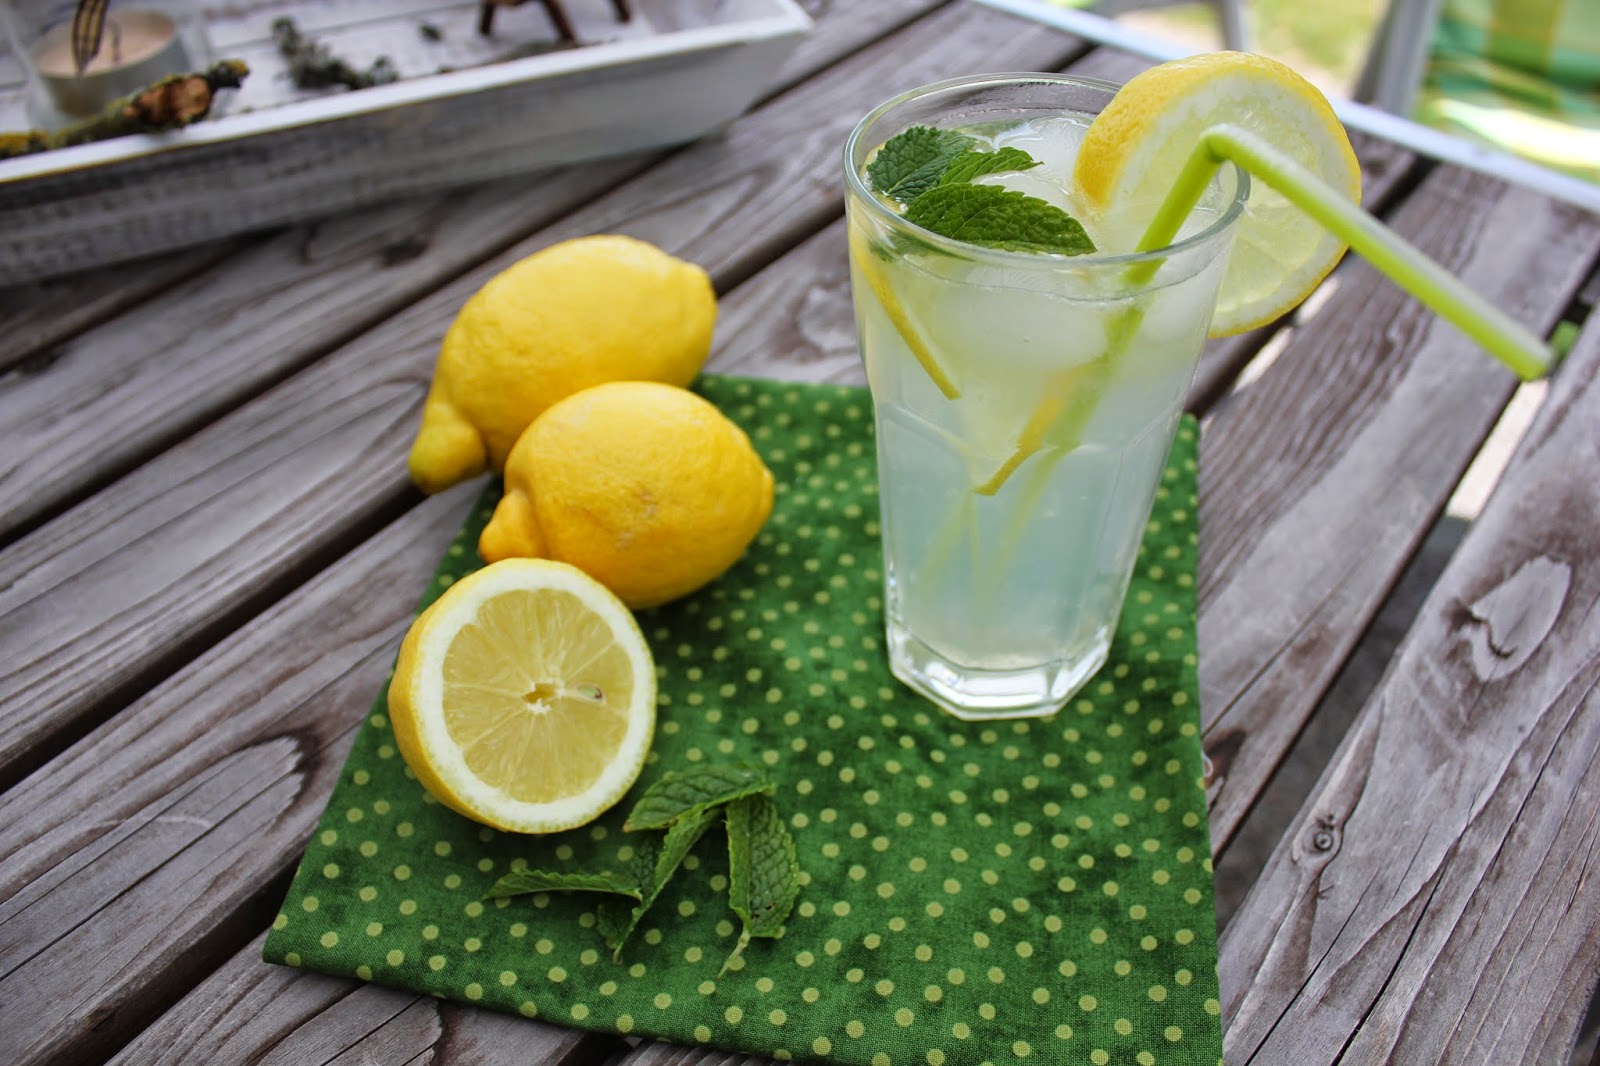 Each Day A Daisy: Selbstgemachte Limonade